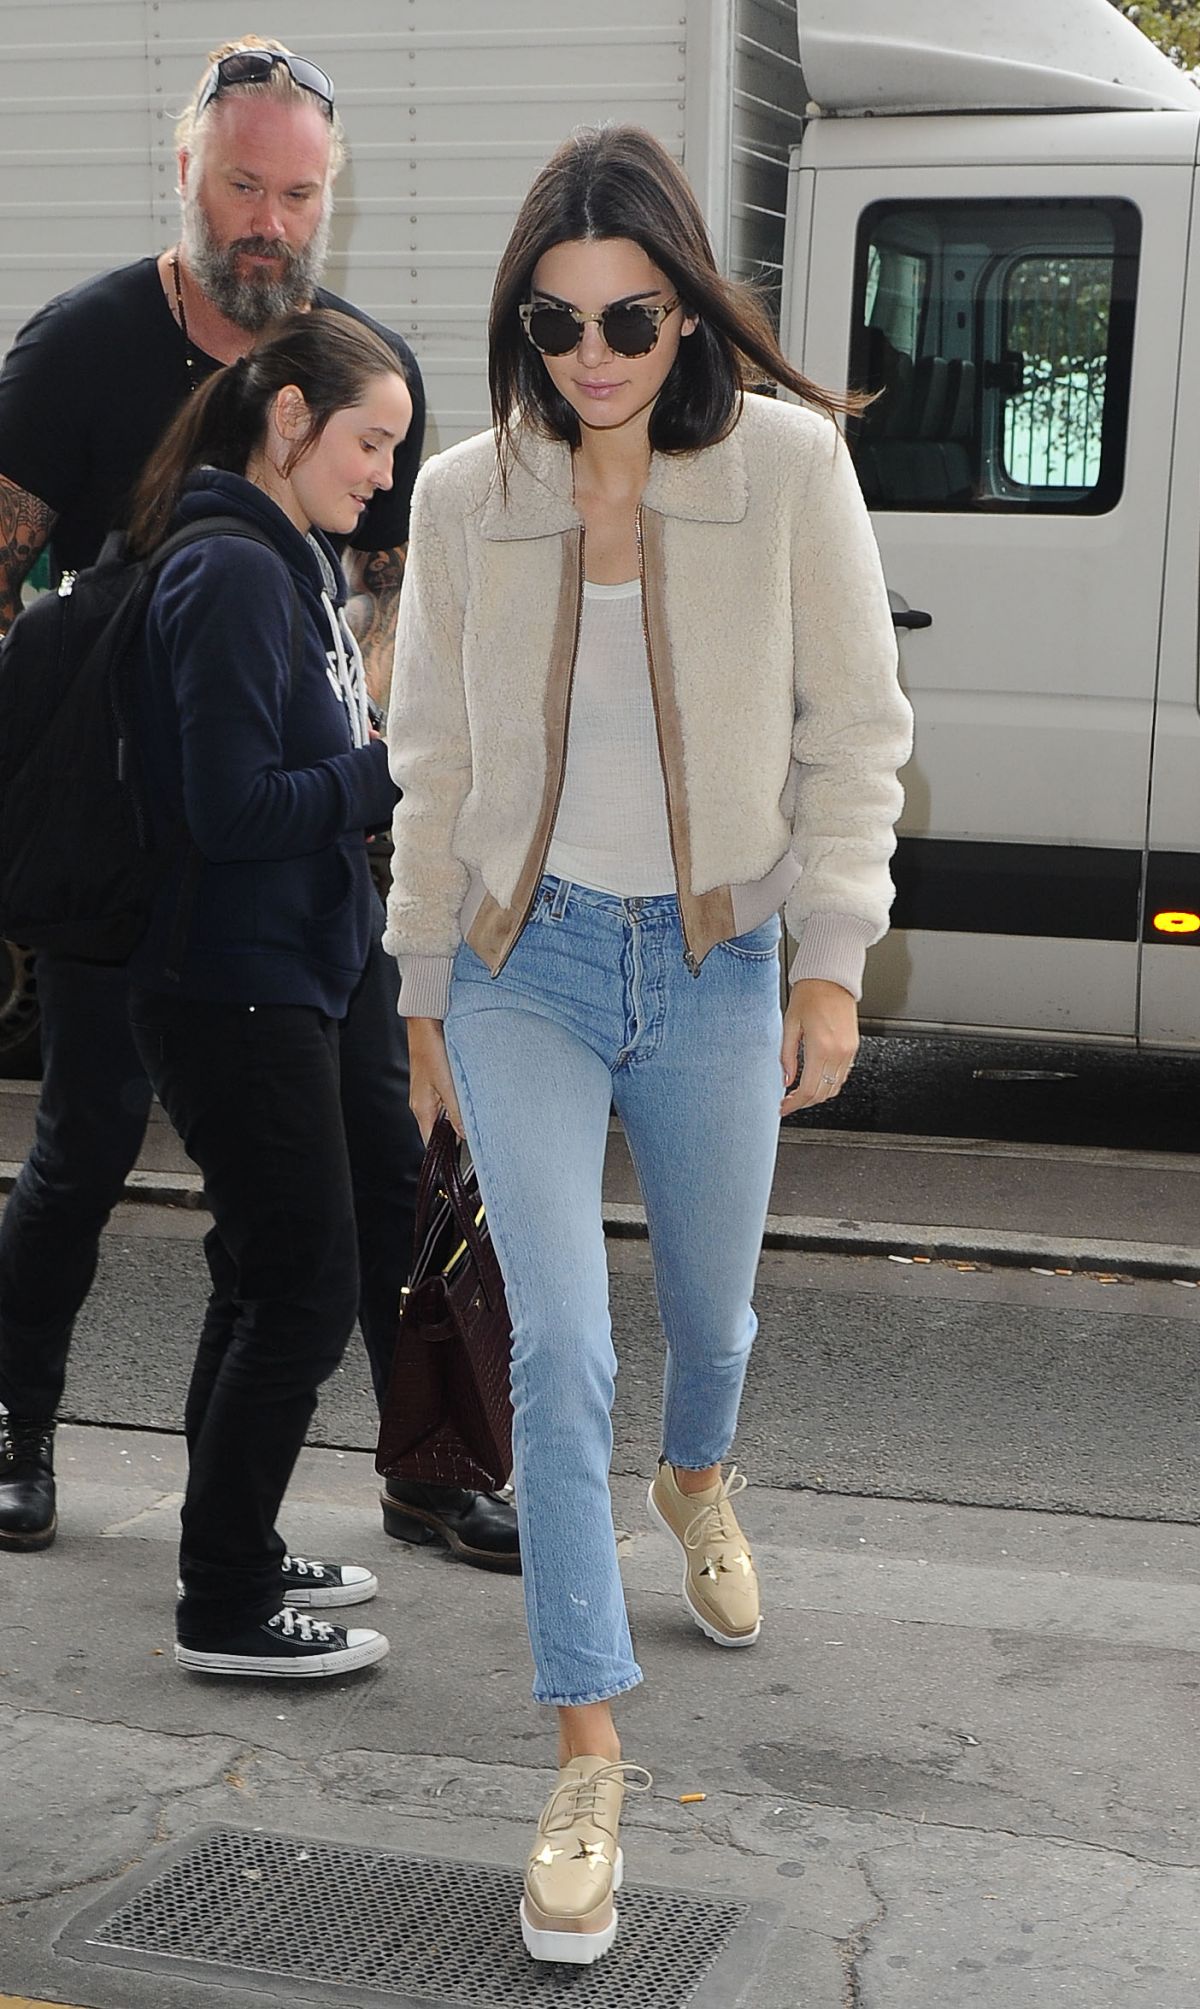 KENDALL JENNER in Jeans Out in Paris 10/05/2015 – HawtCelebs